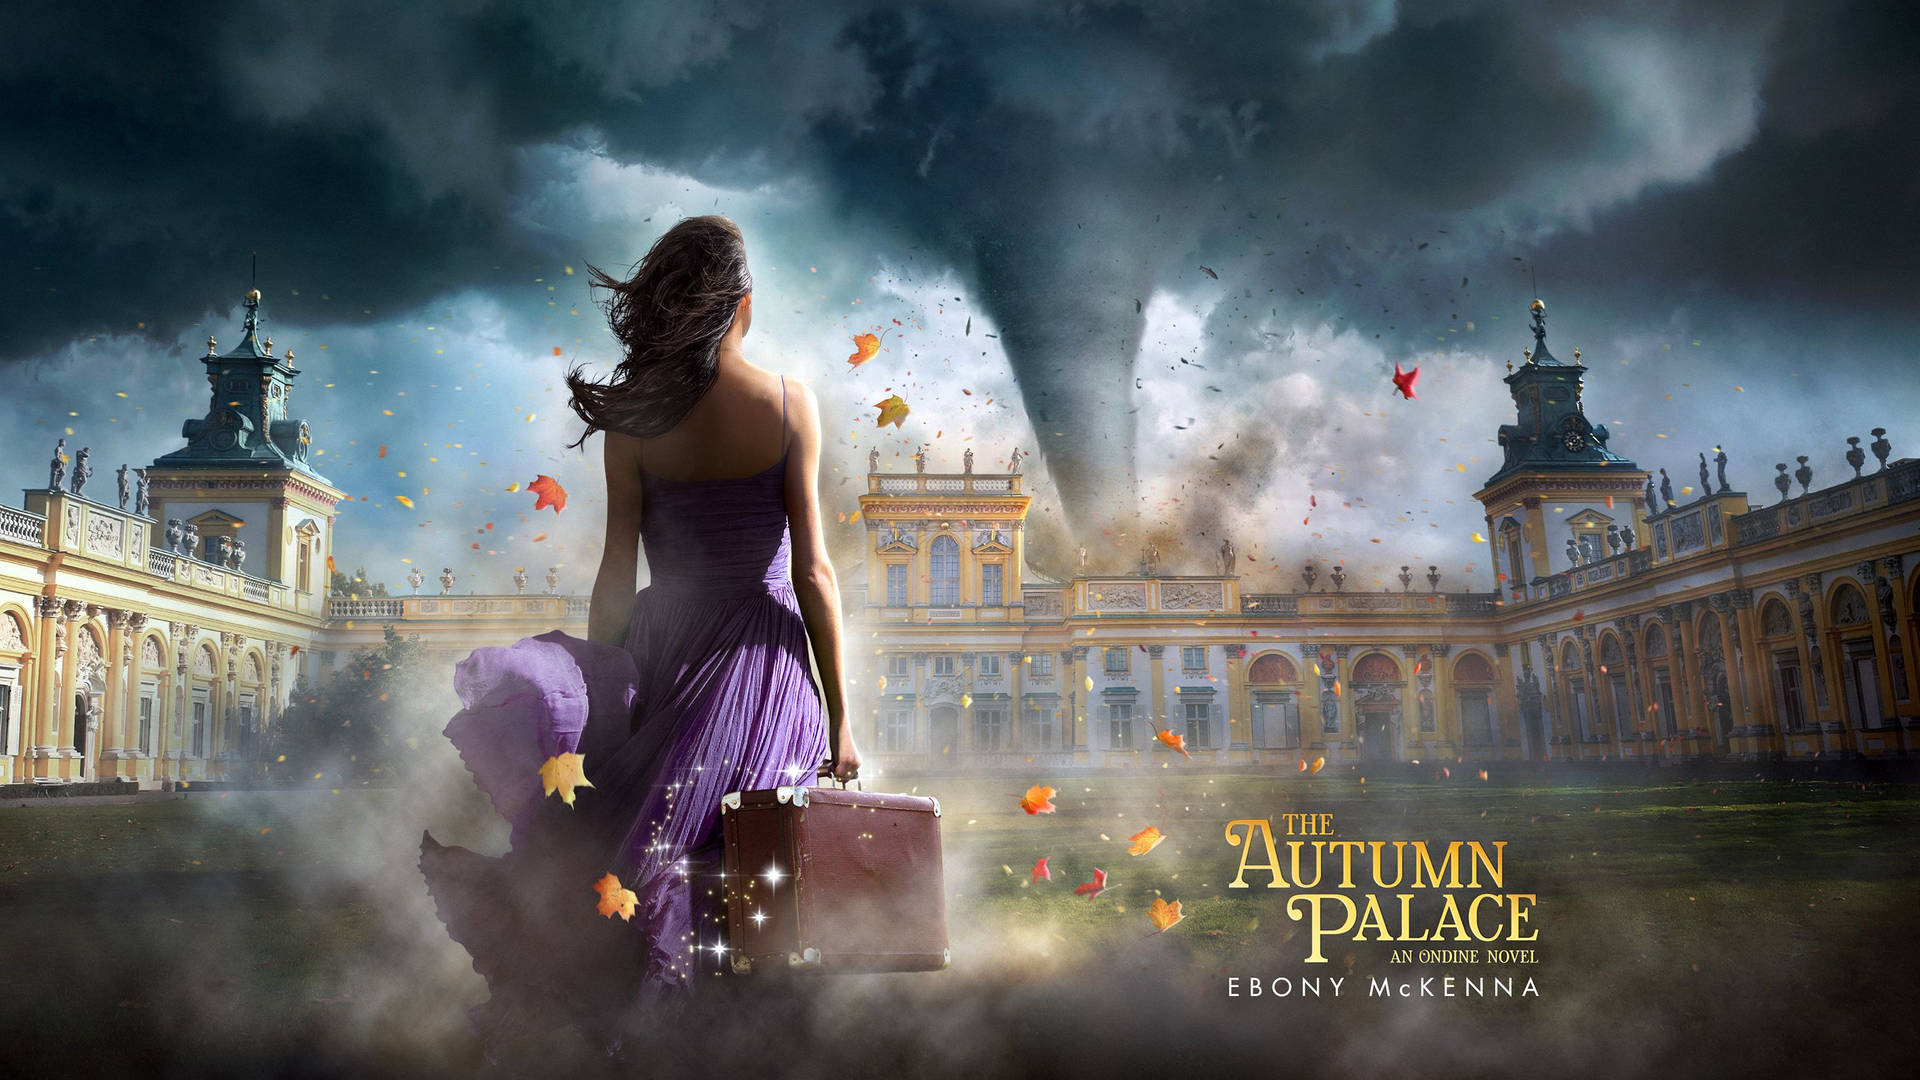 Digital Illustration Of The Autumn Palace Book Cover Wallpaper